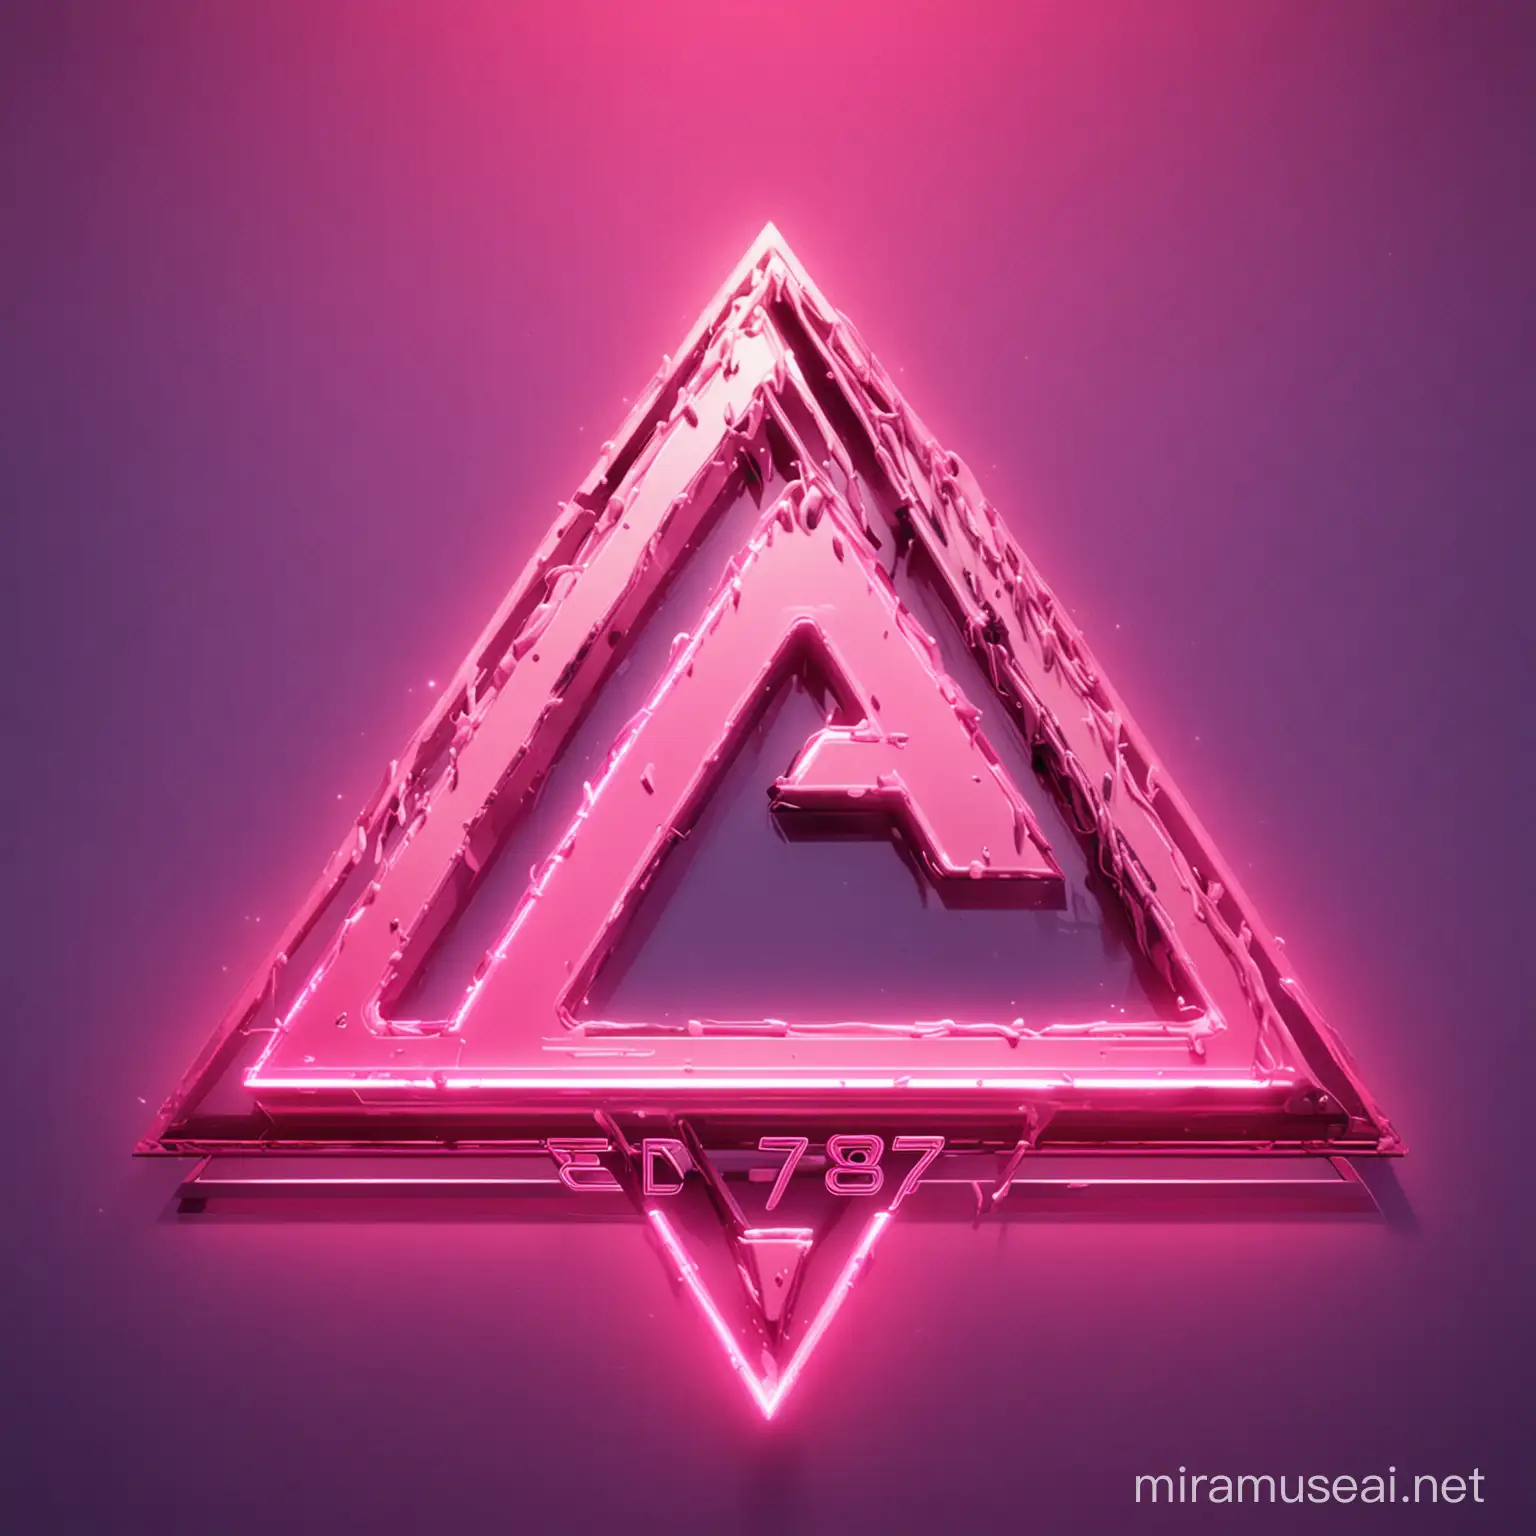 Logo of a synthwave band called ED - 87 in vaporwave style with pink lights and chrome letters in a metal triangle.